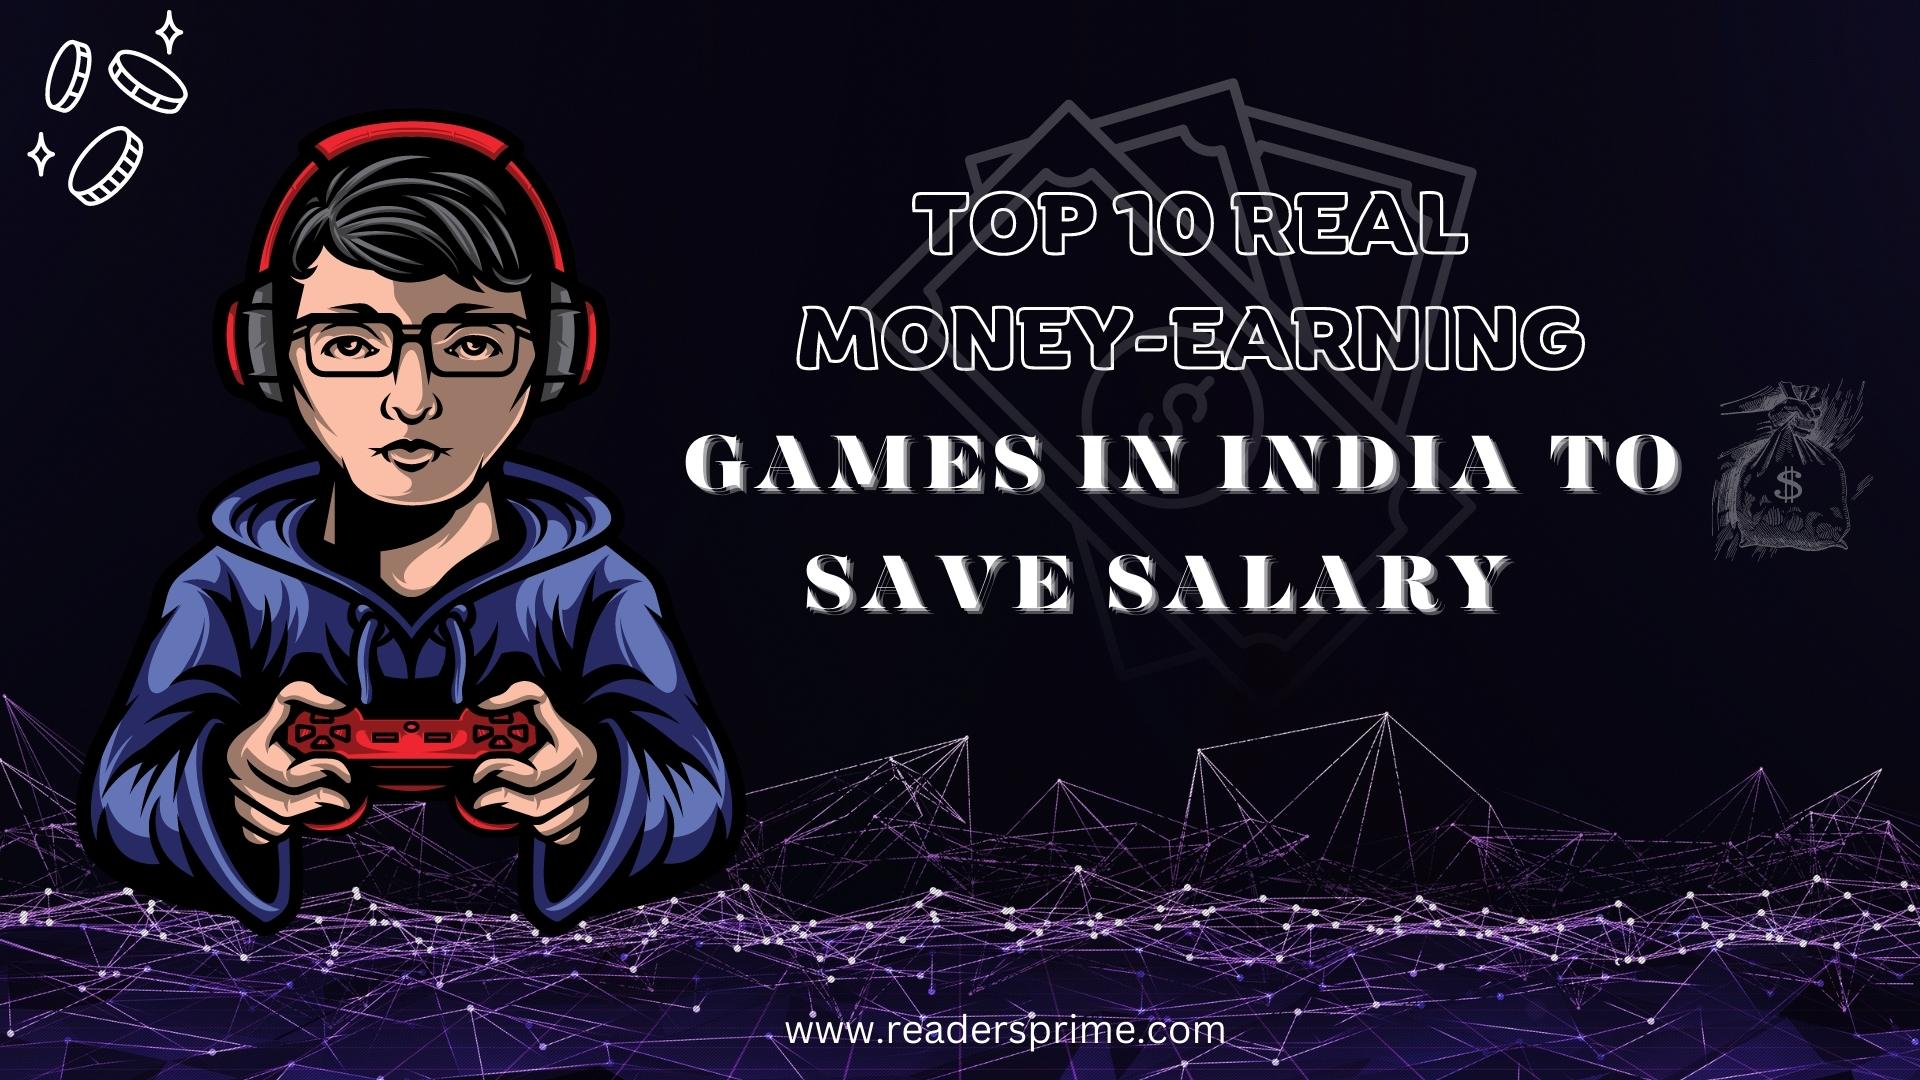 Top 10 Real Money-Earning Games in India to Save Salary